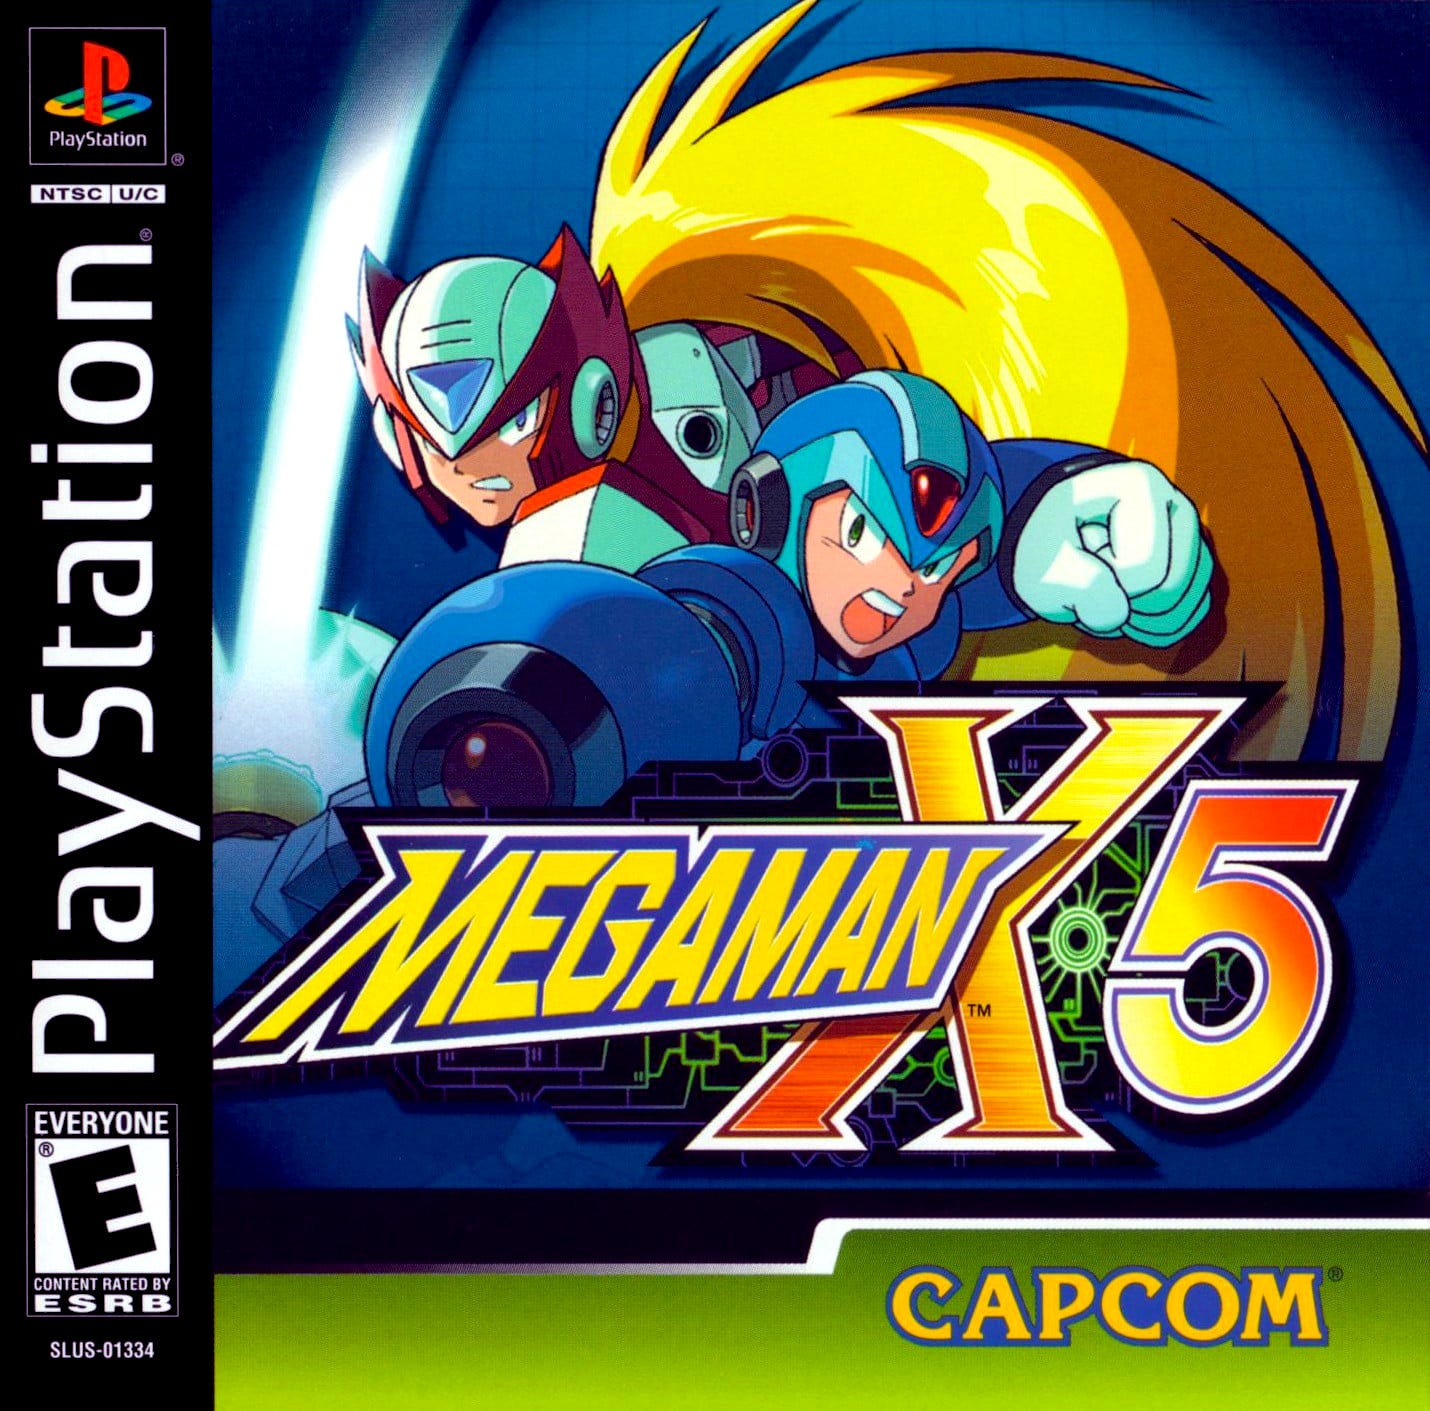 The North American box art for Mega Man X5, featuring both playable protagonists, X and Zero, in action poses behind the logo. Zero is behind X, as it's still X's name on the box and all.